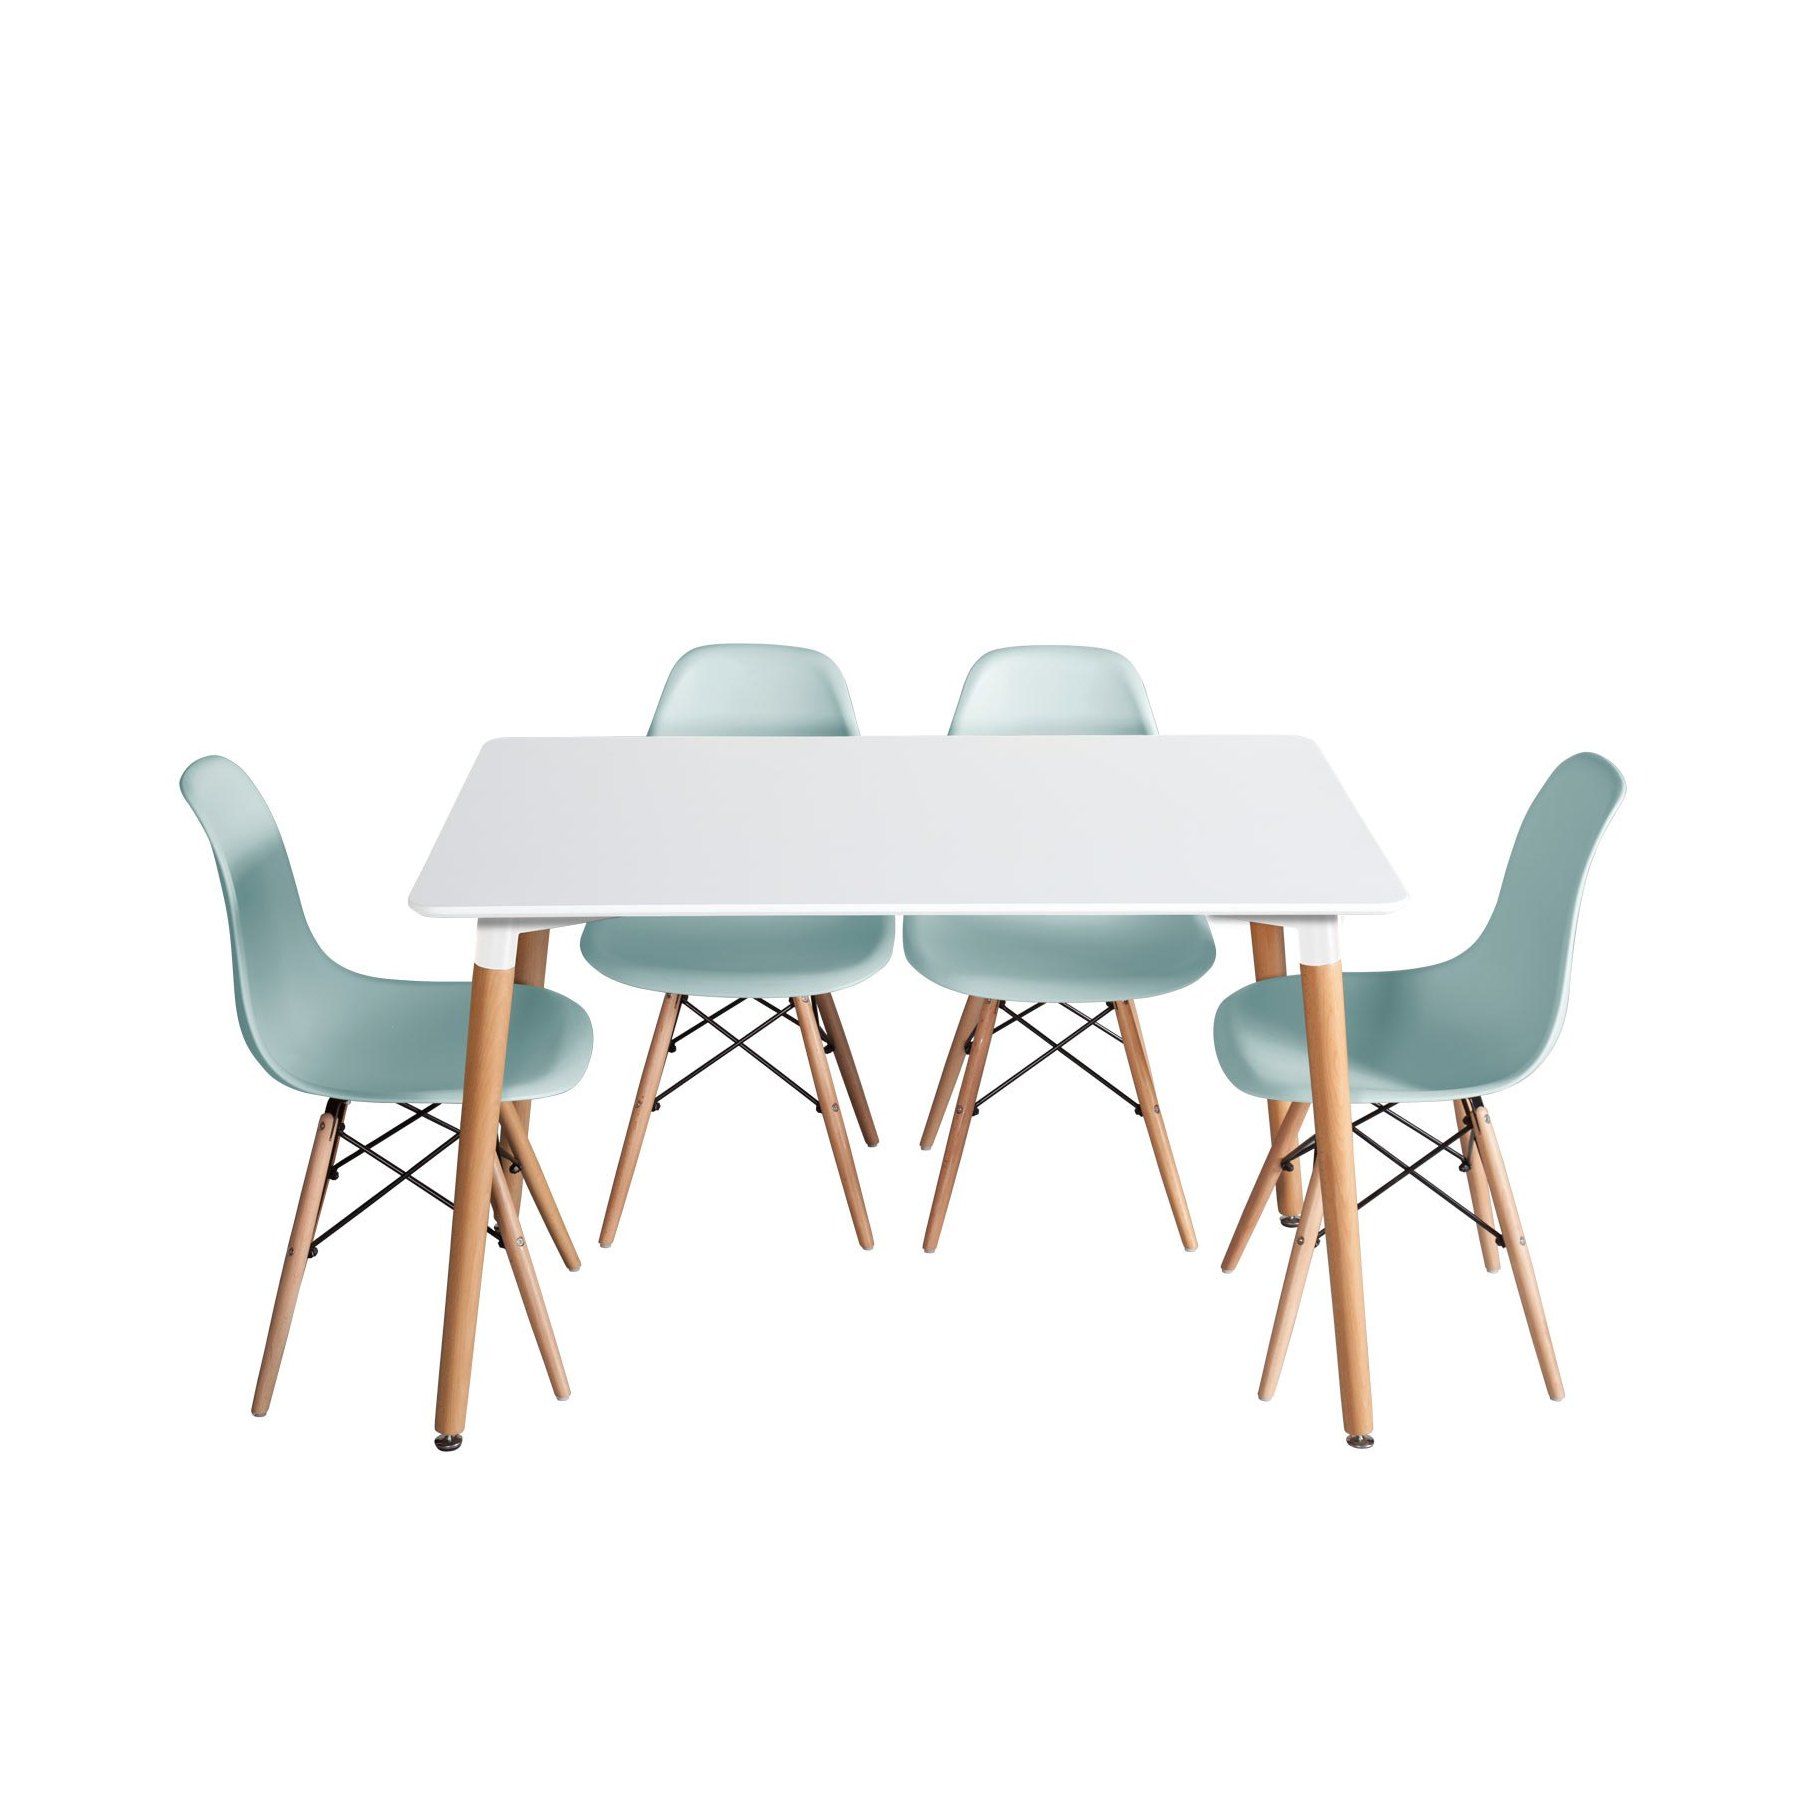 PACK TABLE BEECH BLANCH ET 4 CHAISES TOWER WOOD EAUMARINE